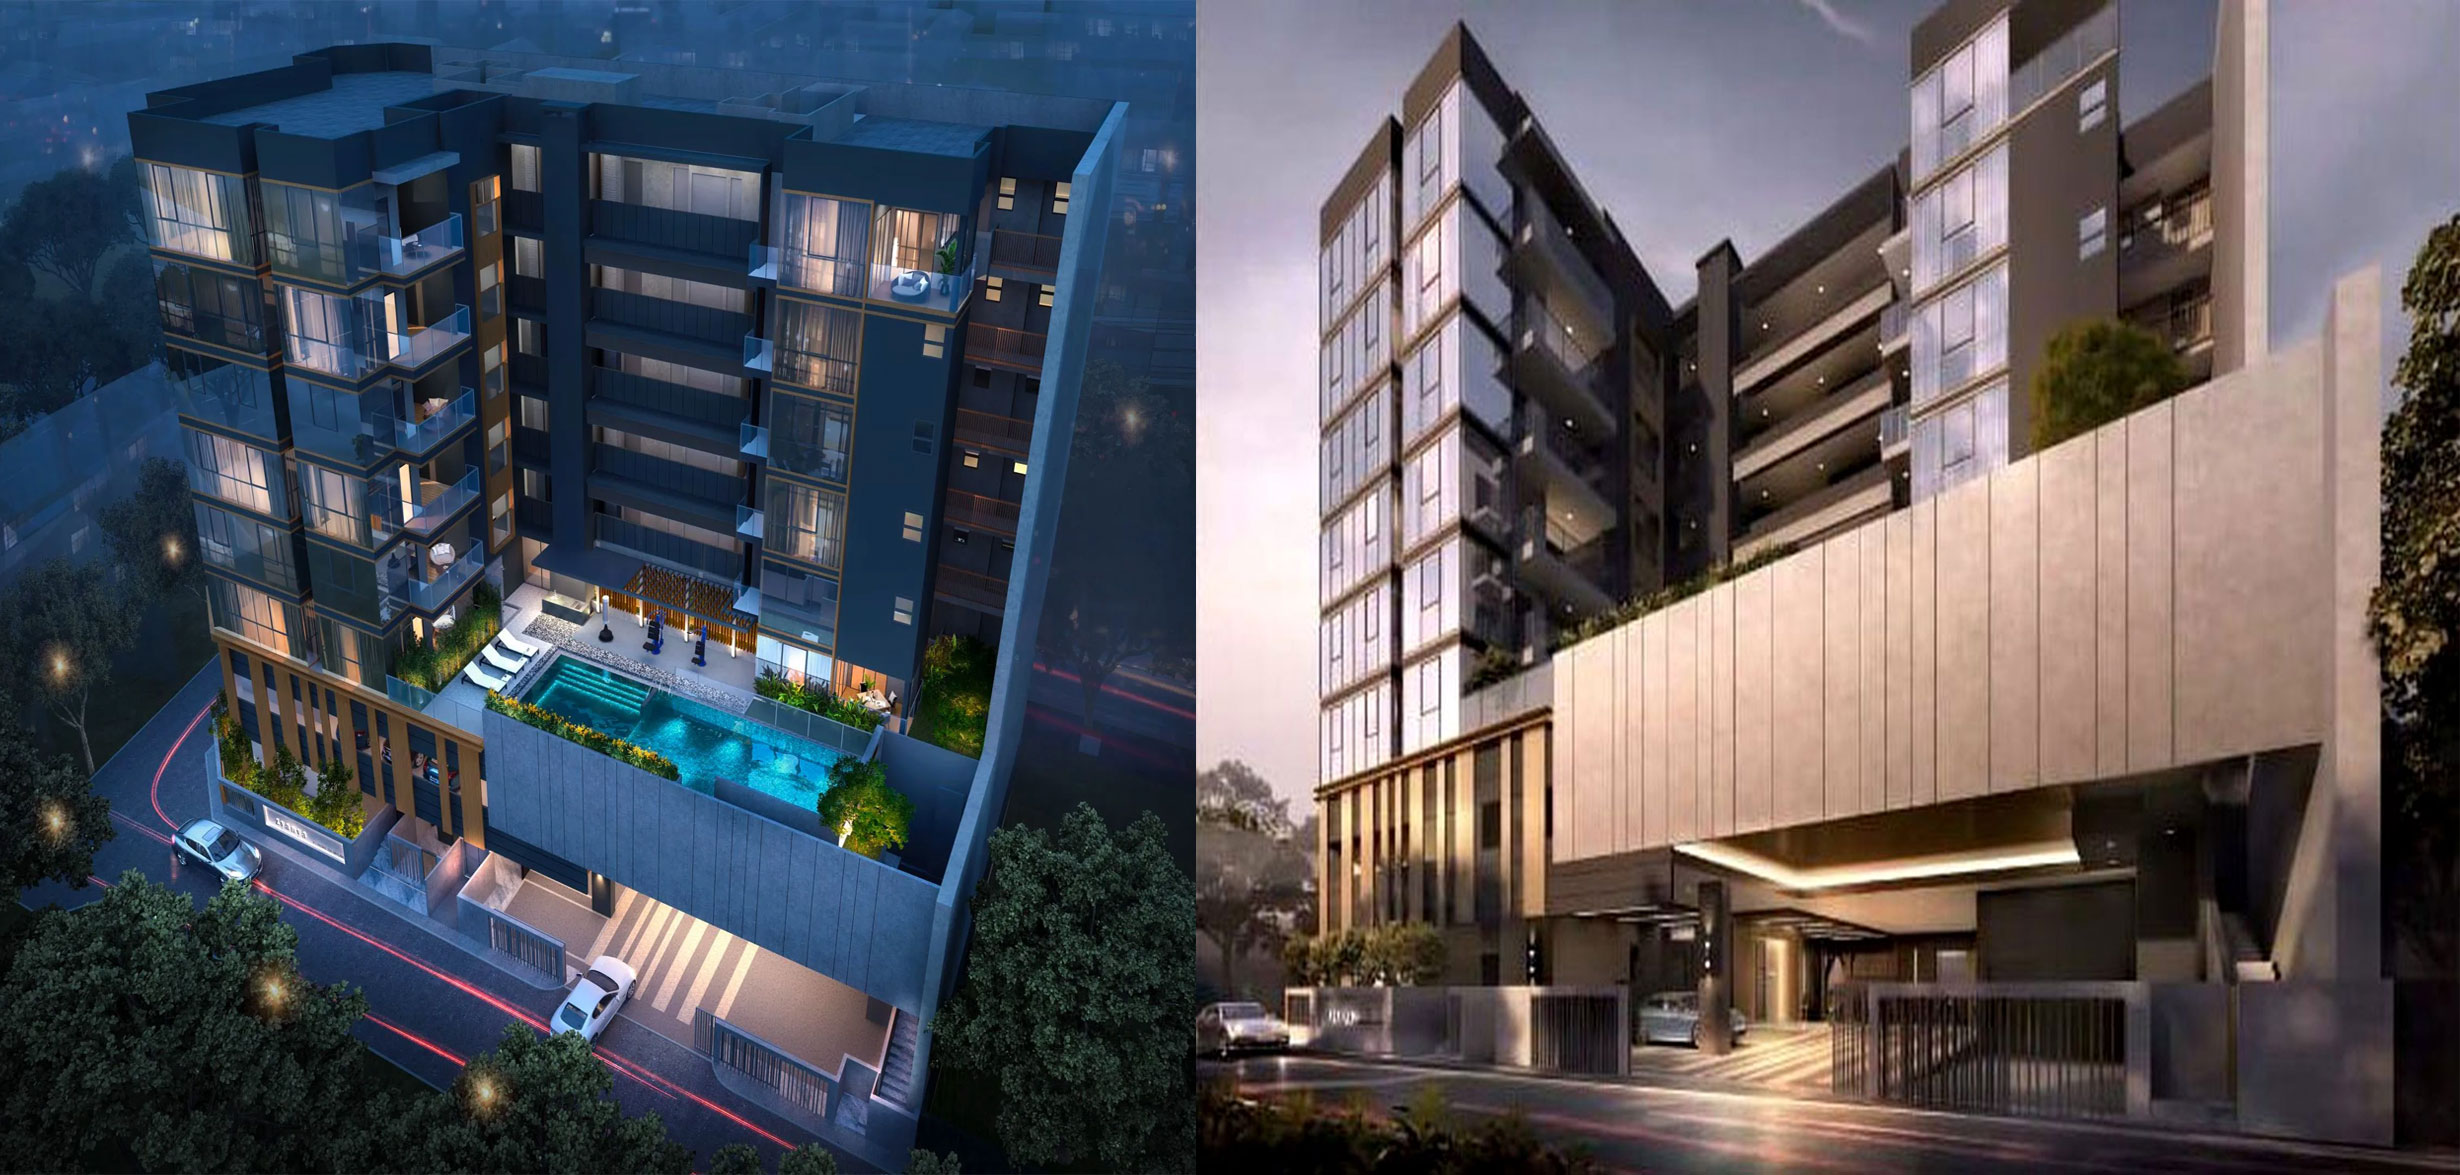 Zyanya Condo - Perspective design of internal utilities and gates of the project